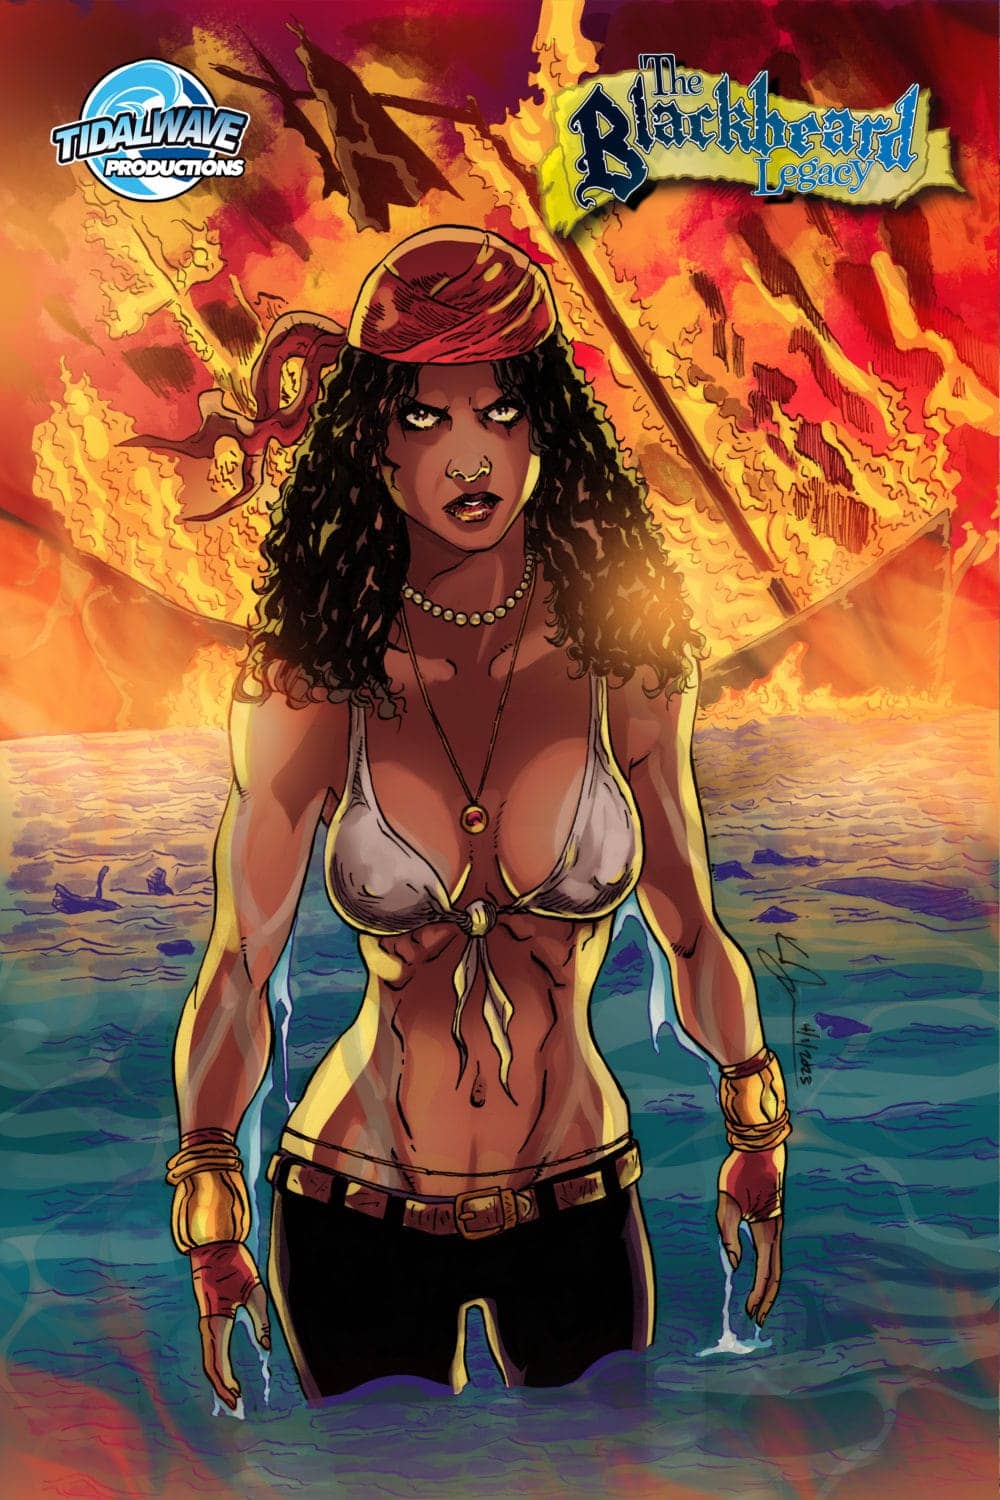 BBL-1-cover-1, Tidal Wave Comics brings Black and diverse comic characters to life, Culture Currents Local News & Views News & Views 